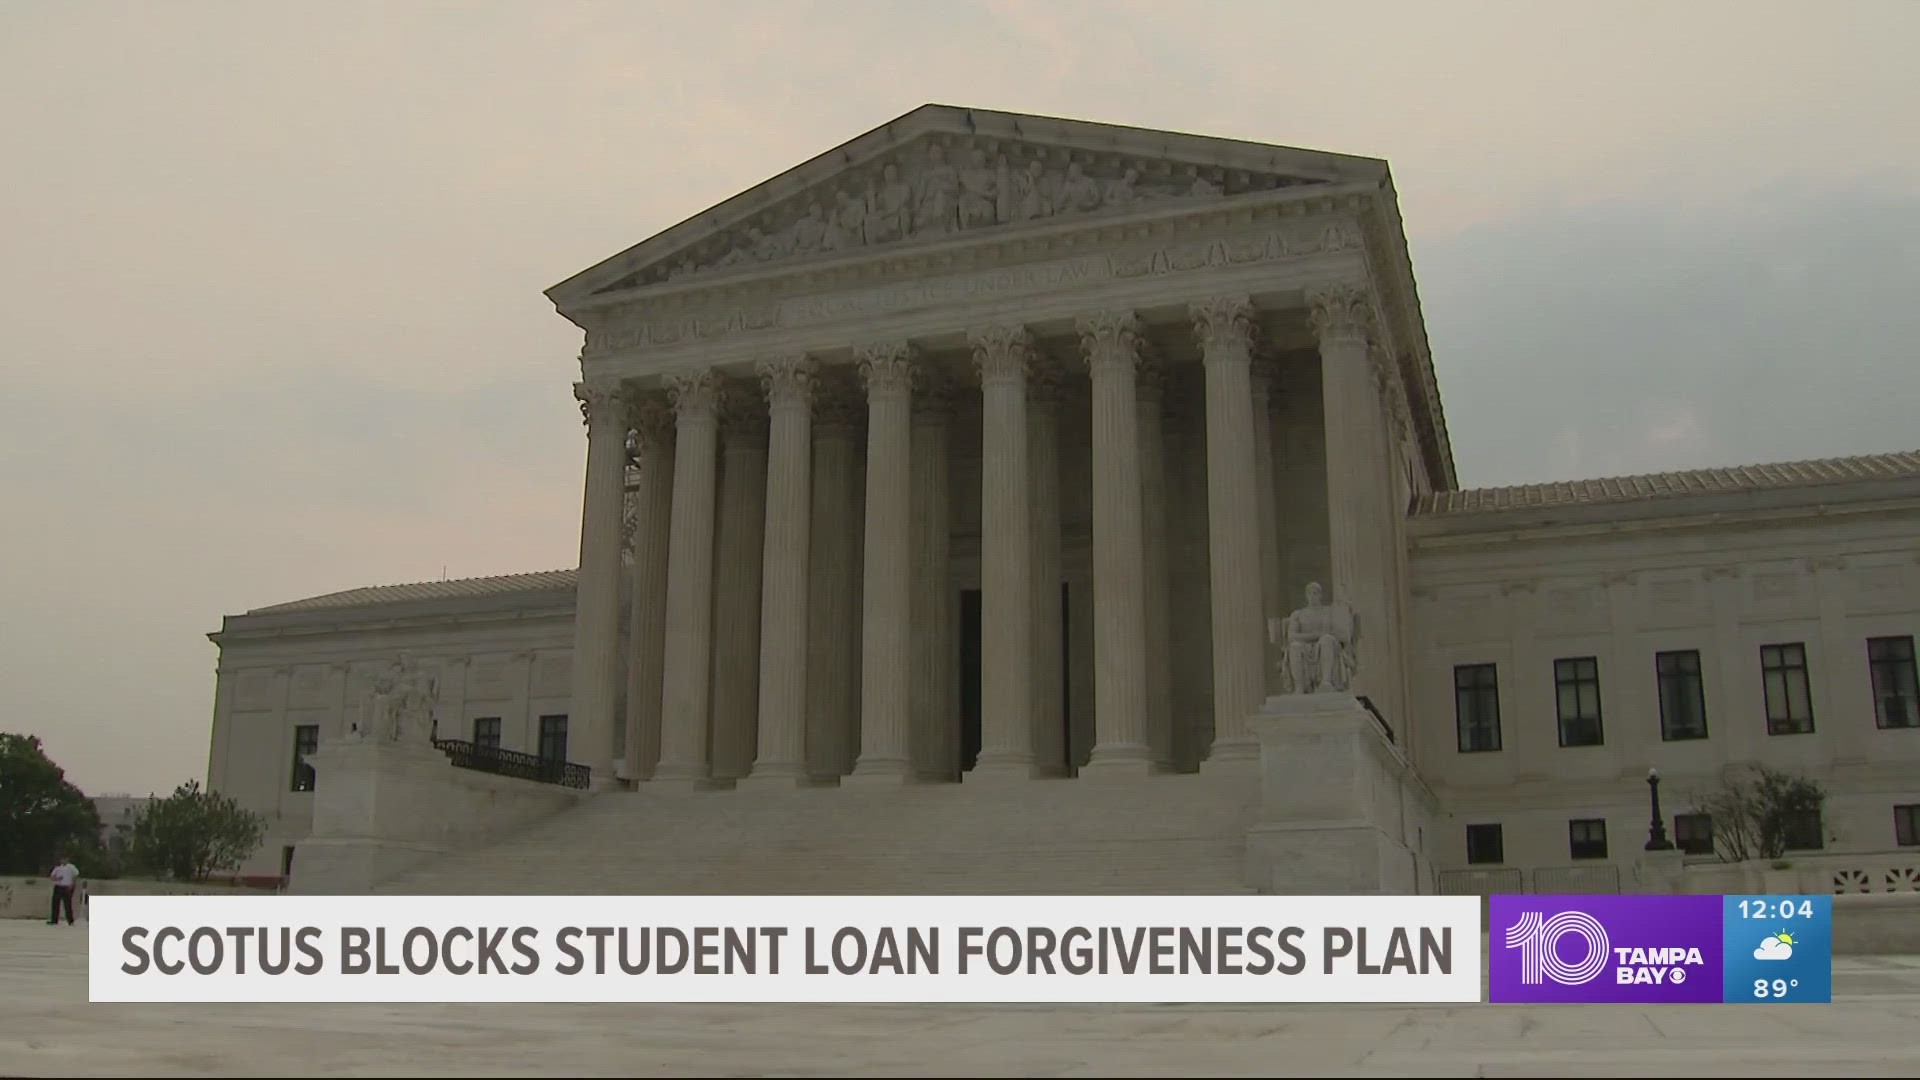 The Supreme Court has issued its ruling on President Joe Biden's student loan forgiveness plan.